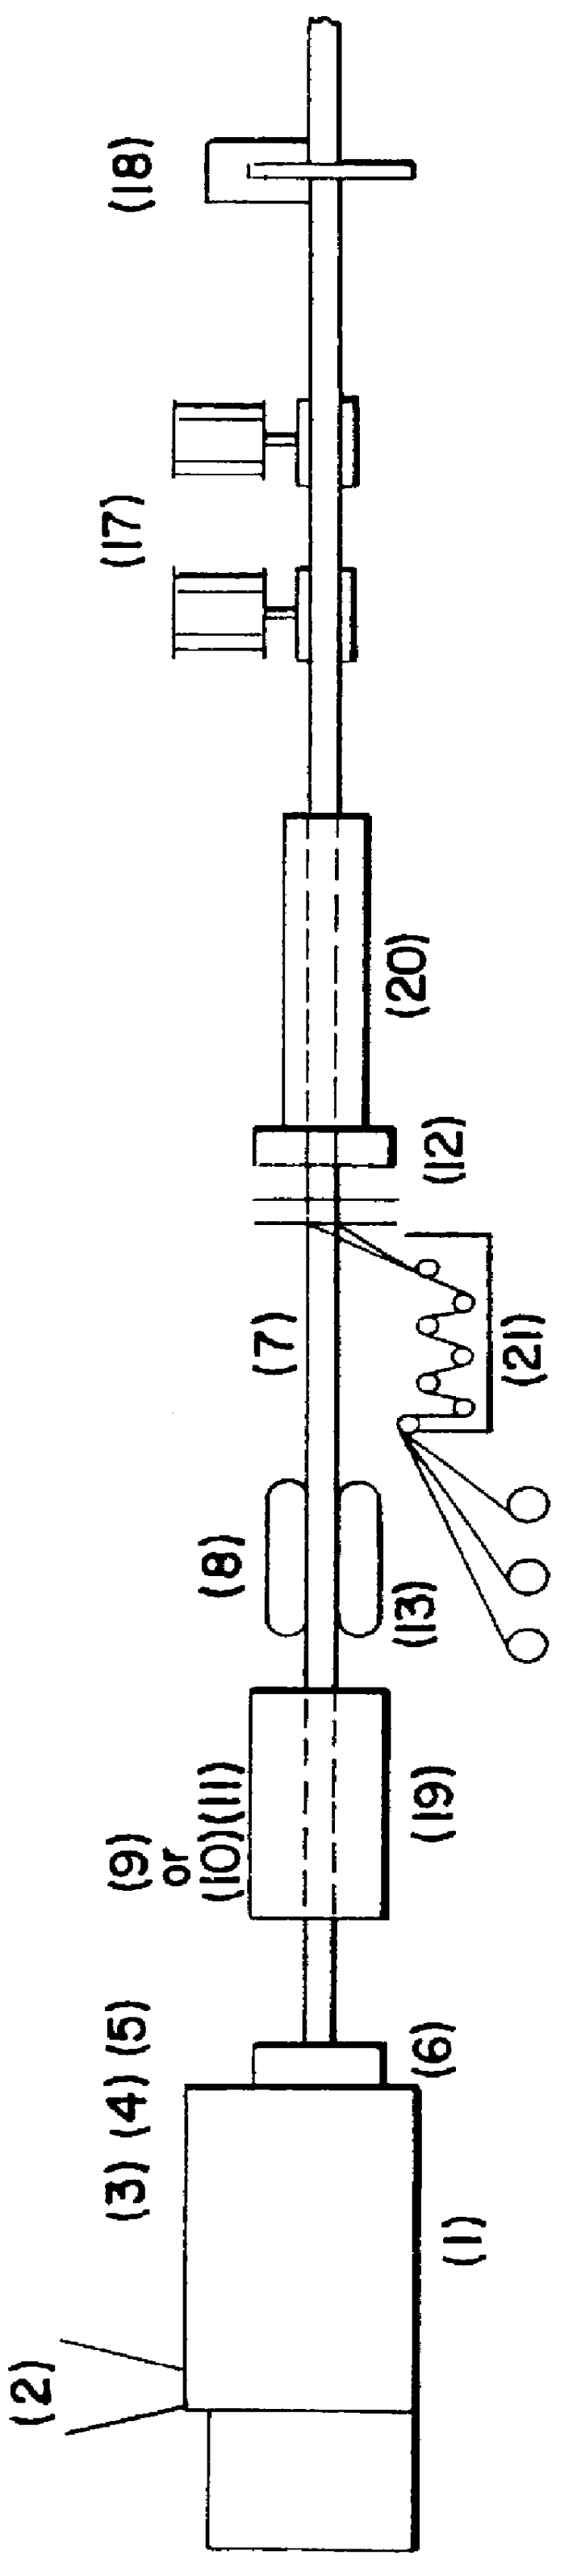 Fiber thermoset reinforced thermoplastic structural member